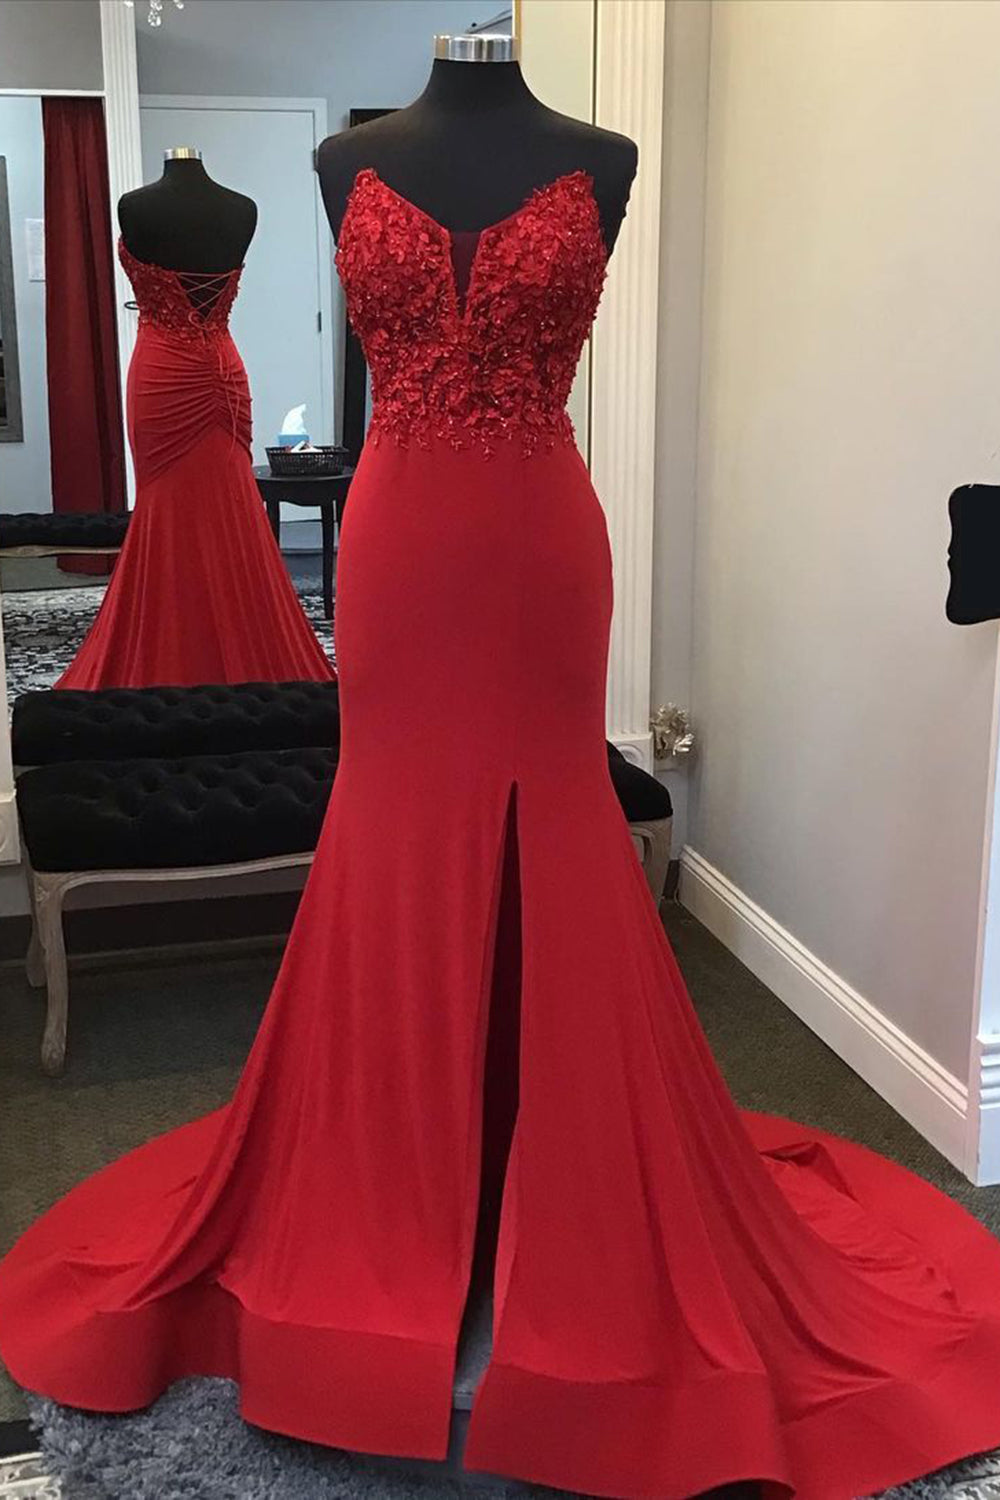 Beaded Red Mermaid Corset Prom Dress with Appliques Gowns, Bridesmaid Dresses Vintage